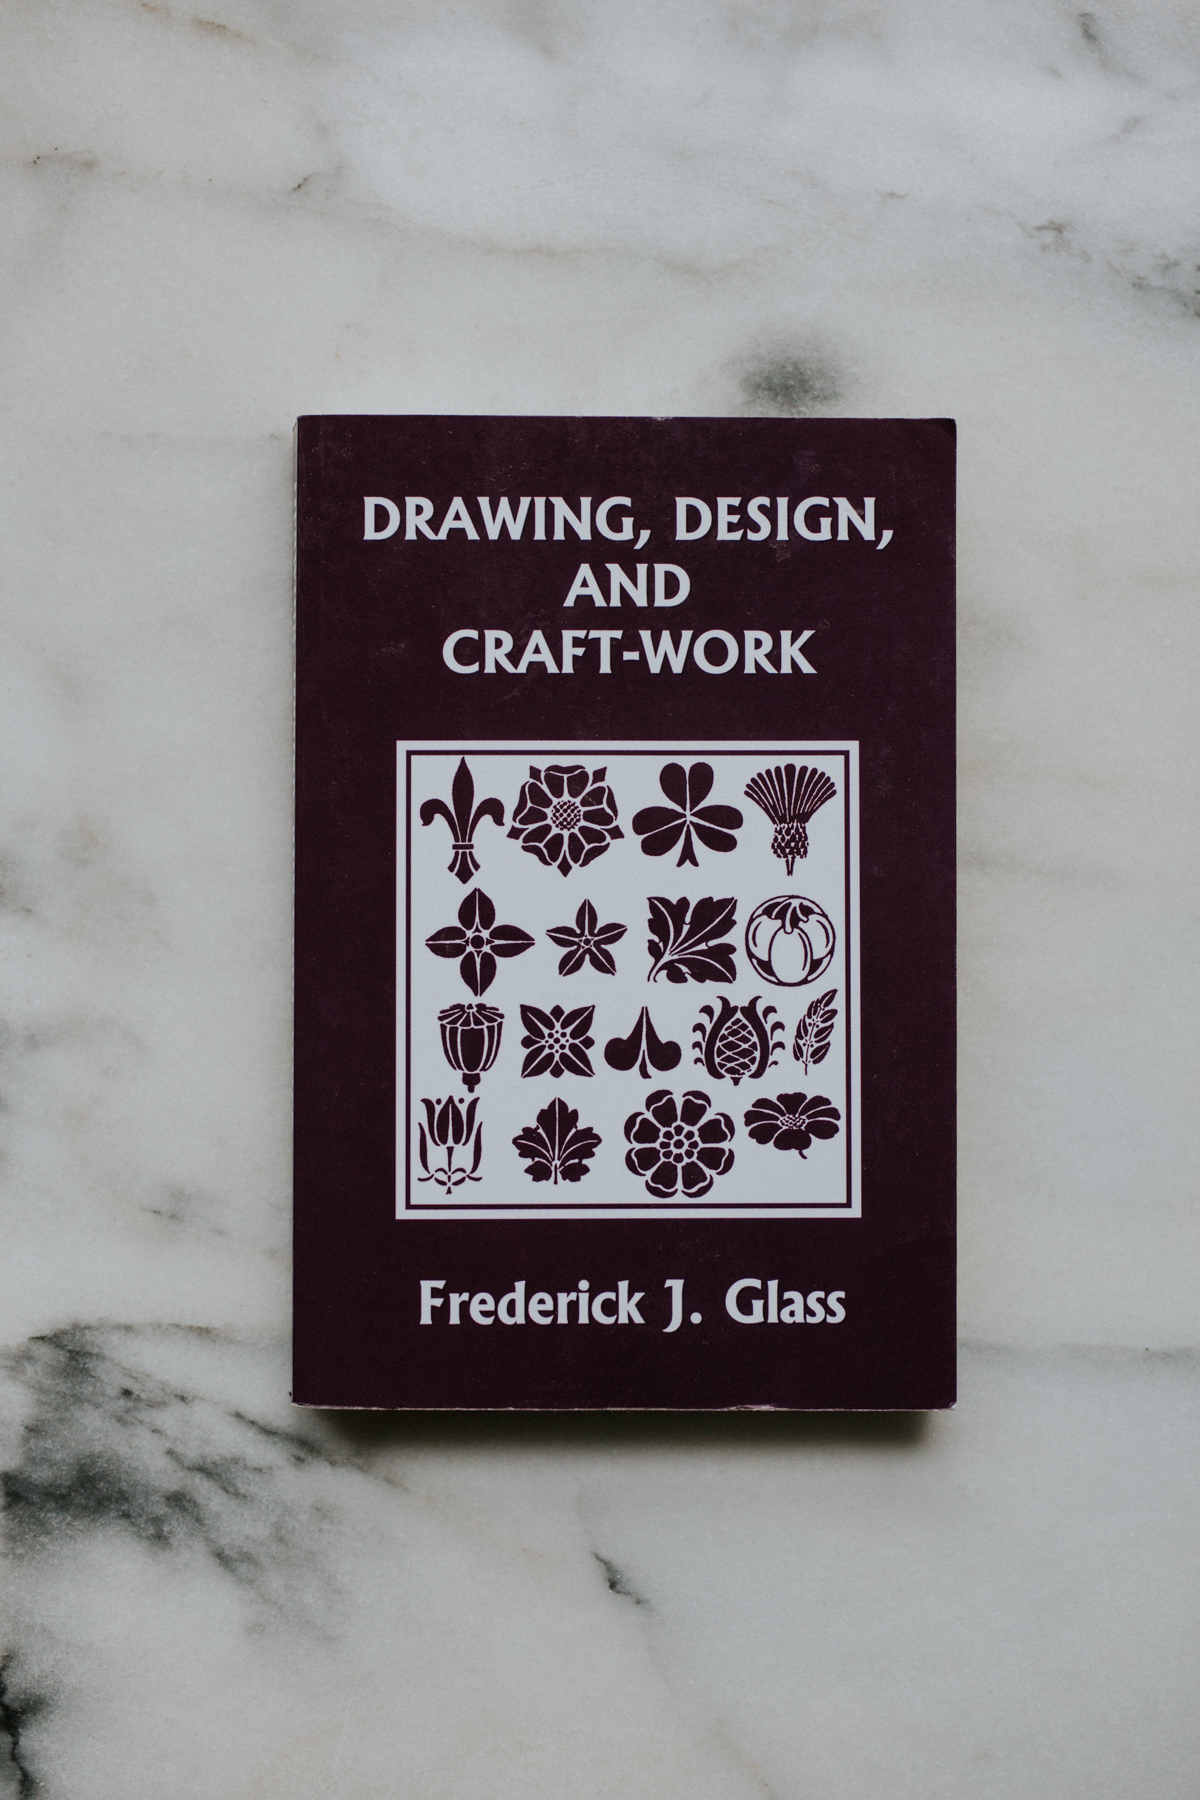 Drawing, Design, and Craft-work by Frederick Glass